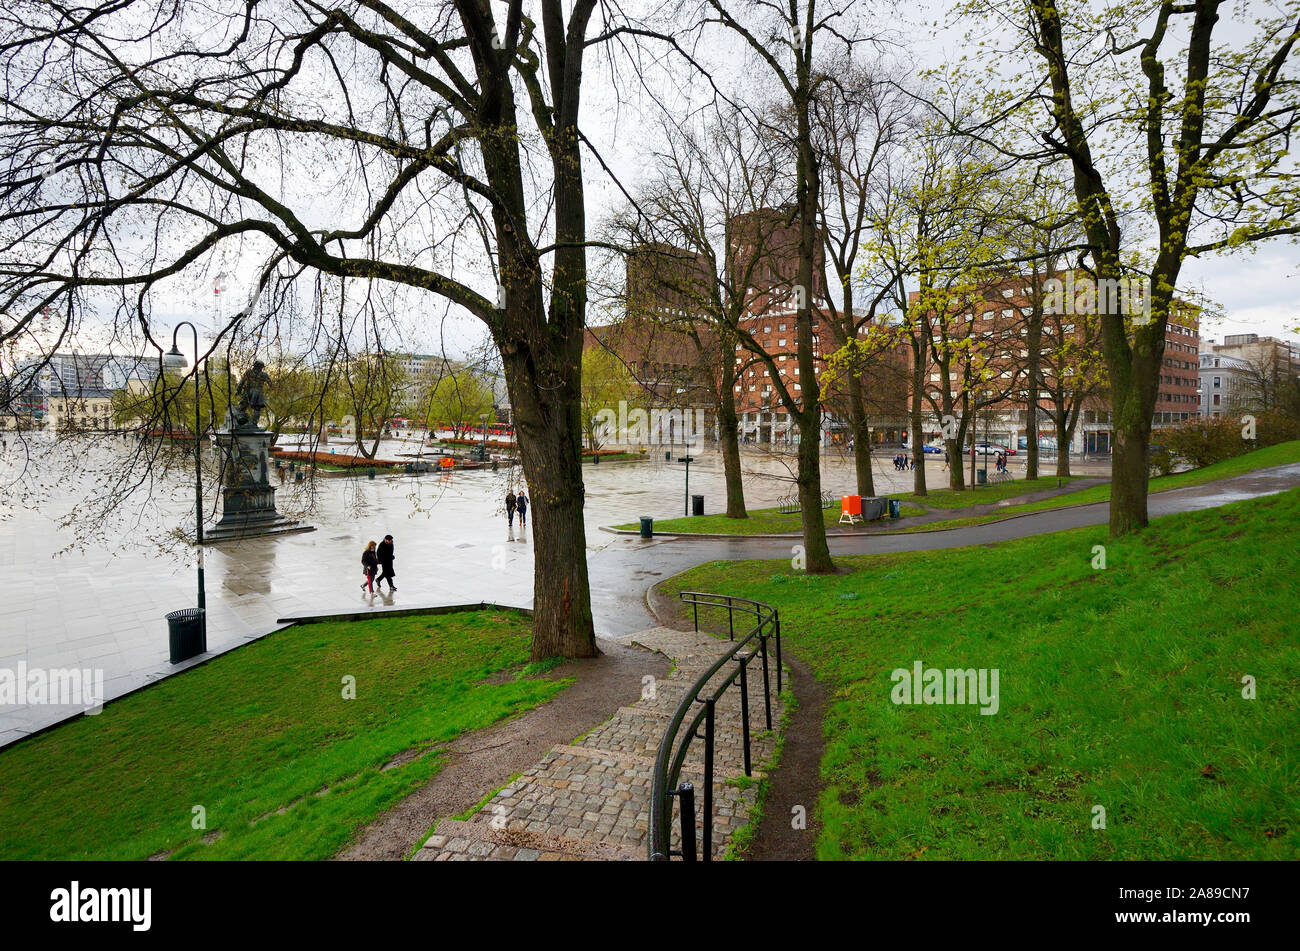 The gardens of Akershus Fortress (Akershus Festning), an iconic guardian of Oslo. Norway Stock Photo